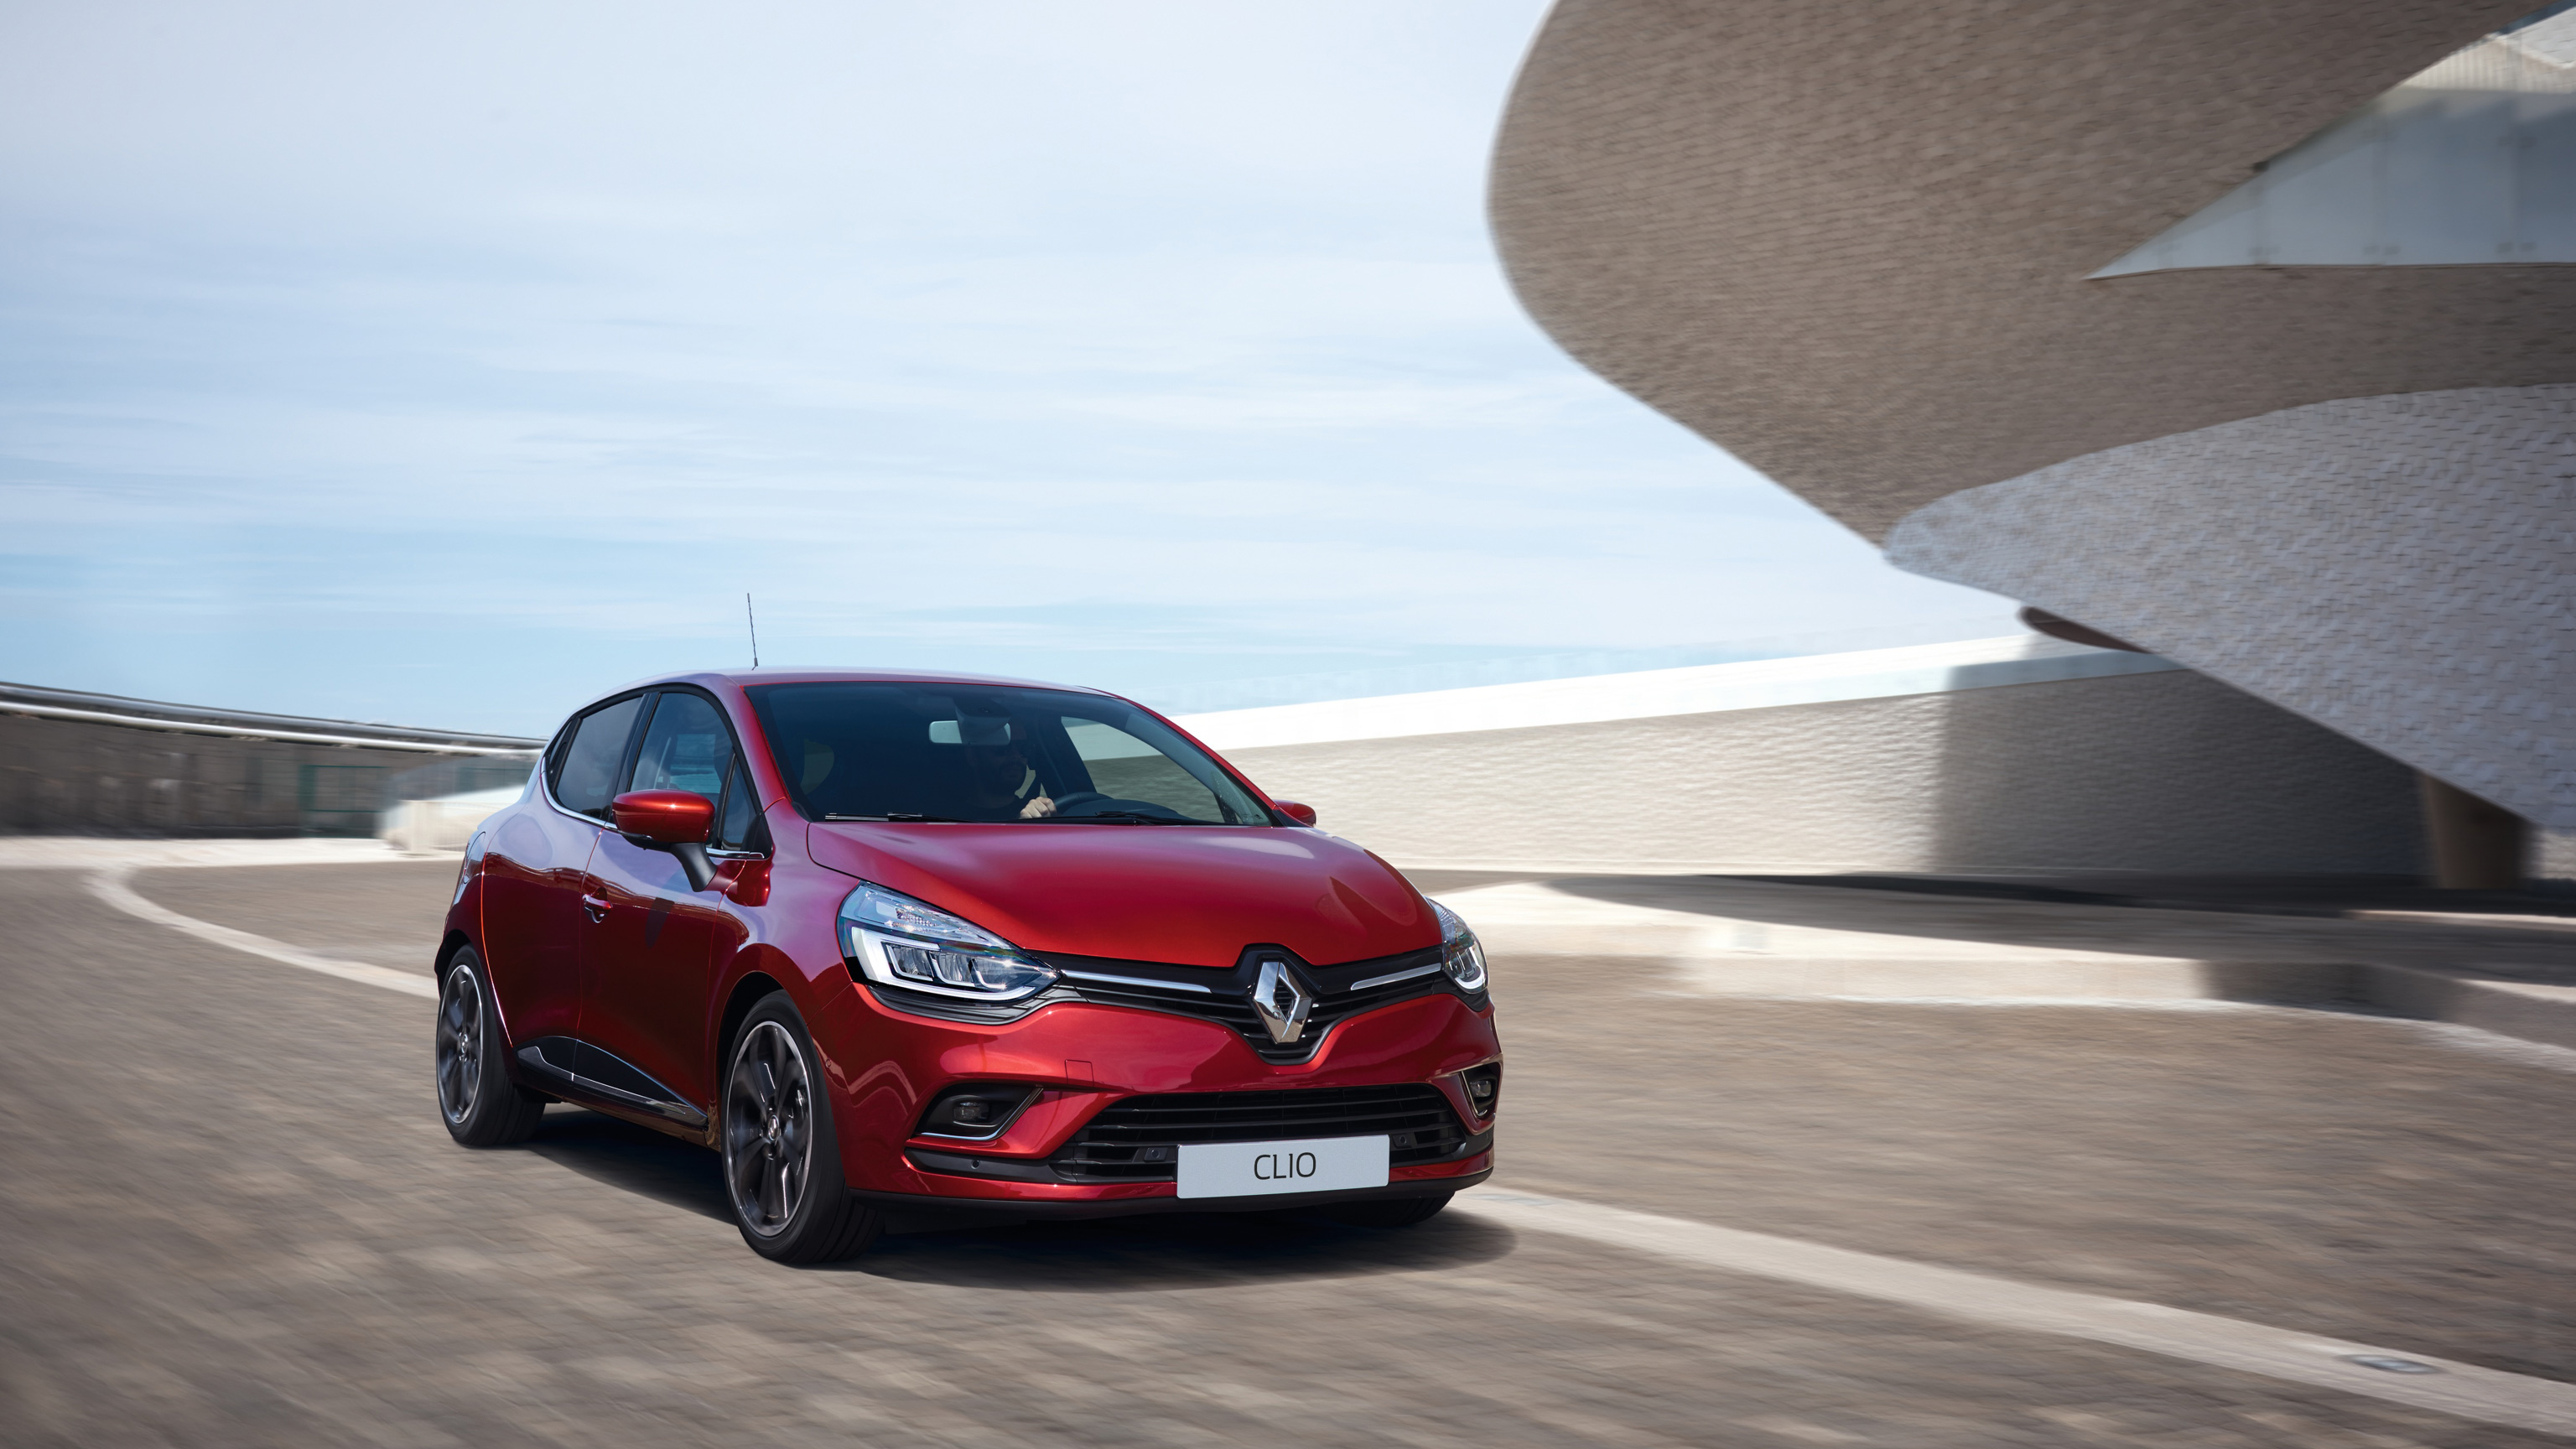 Renault Clio Red Color Front Side 4k HD Wallpaper